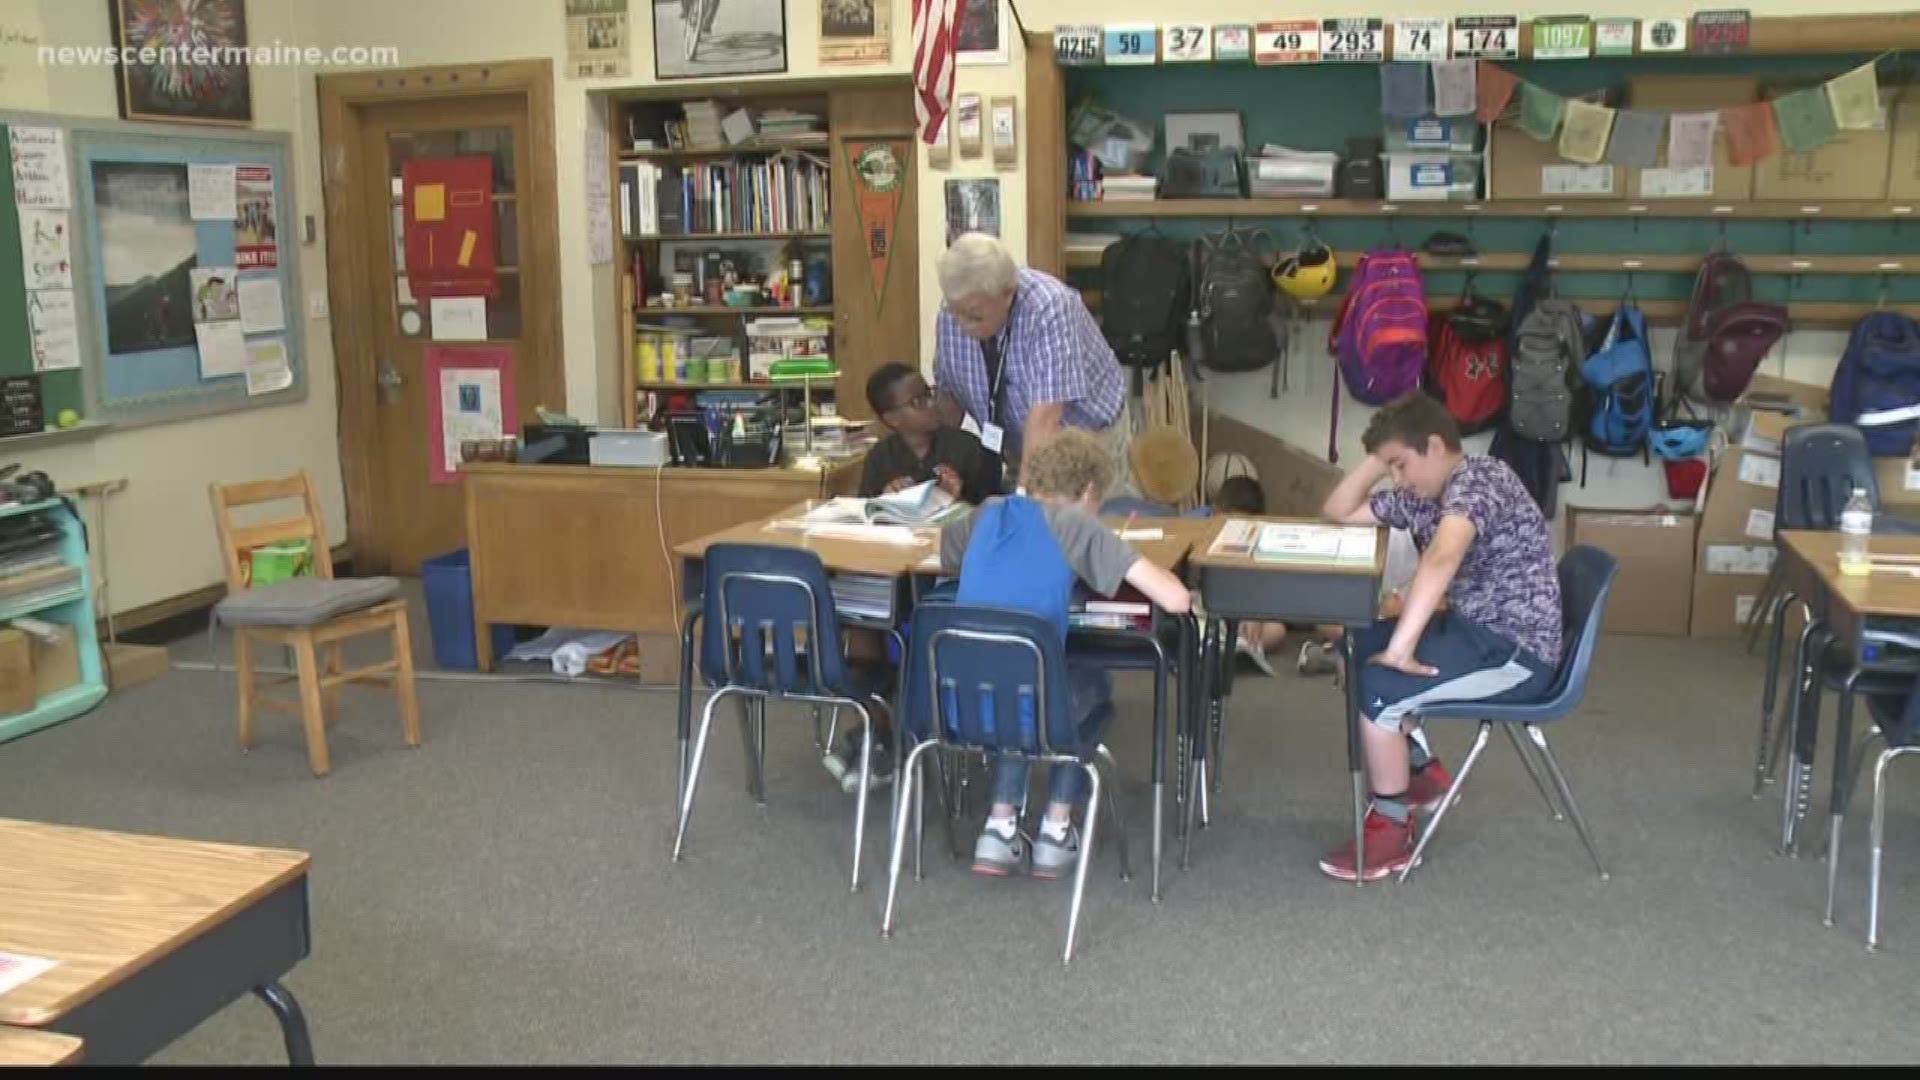 NOW: Teacher spends final day at school in same room he sat in 61 years ago